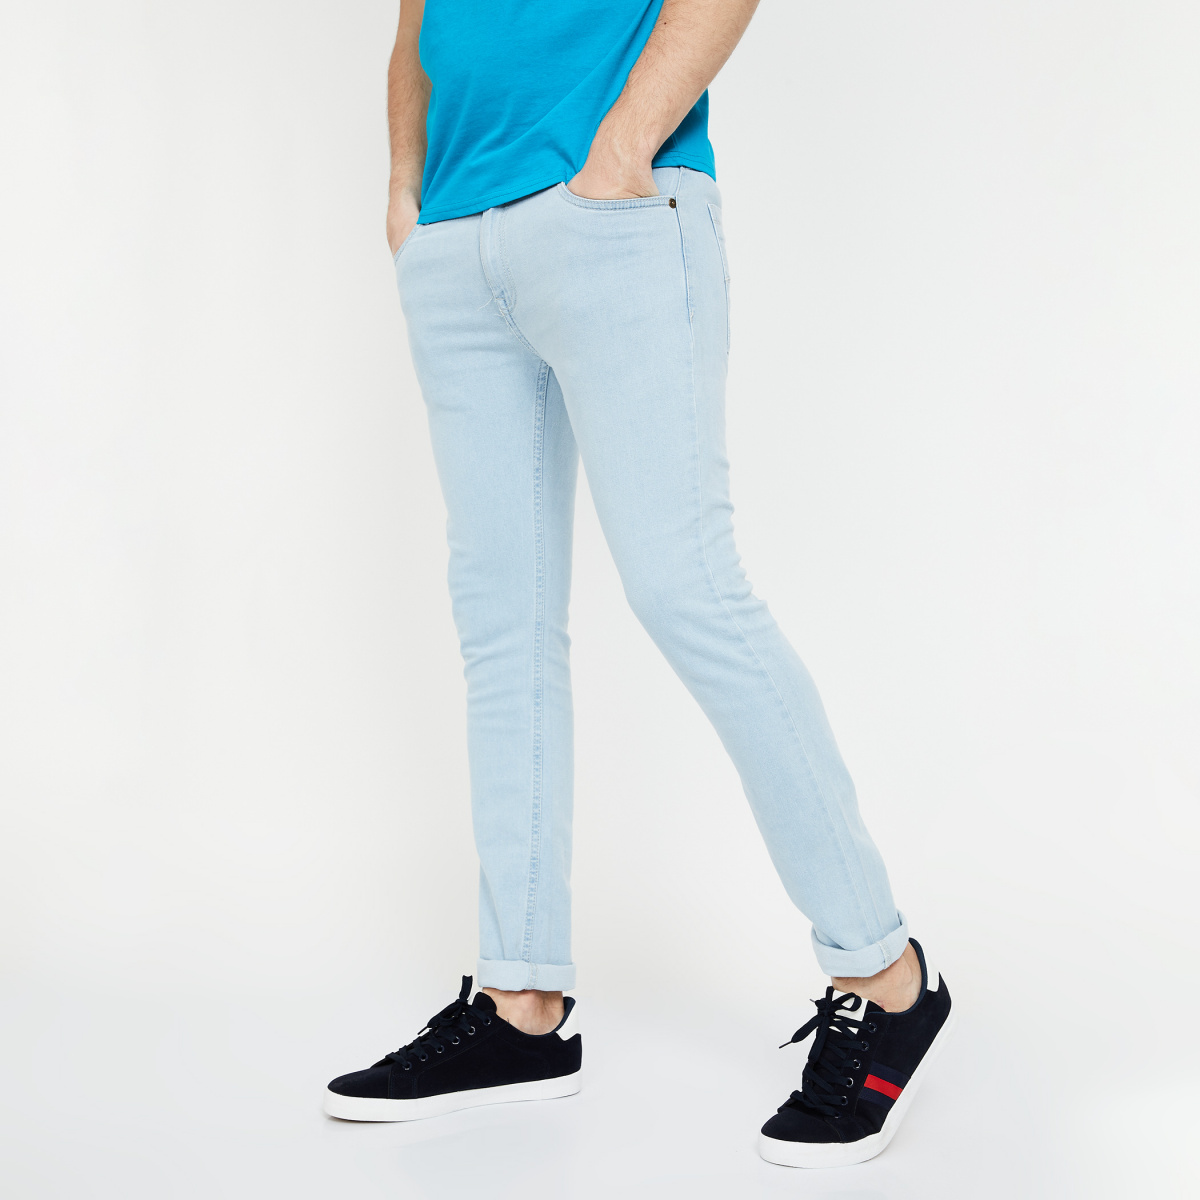 FORCA Solid Low-Rise Skinny Fit Jeans